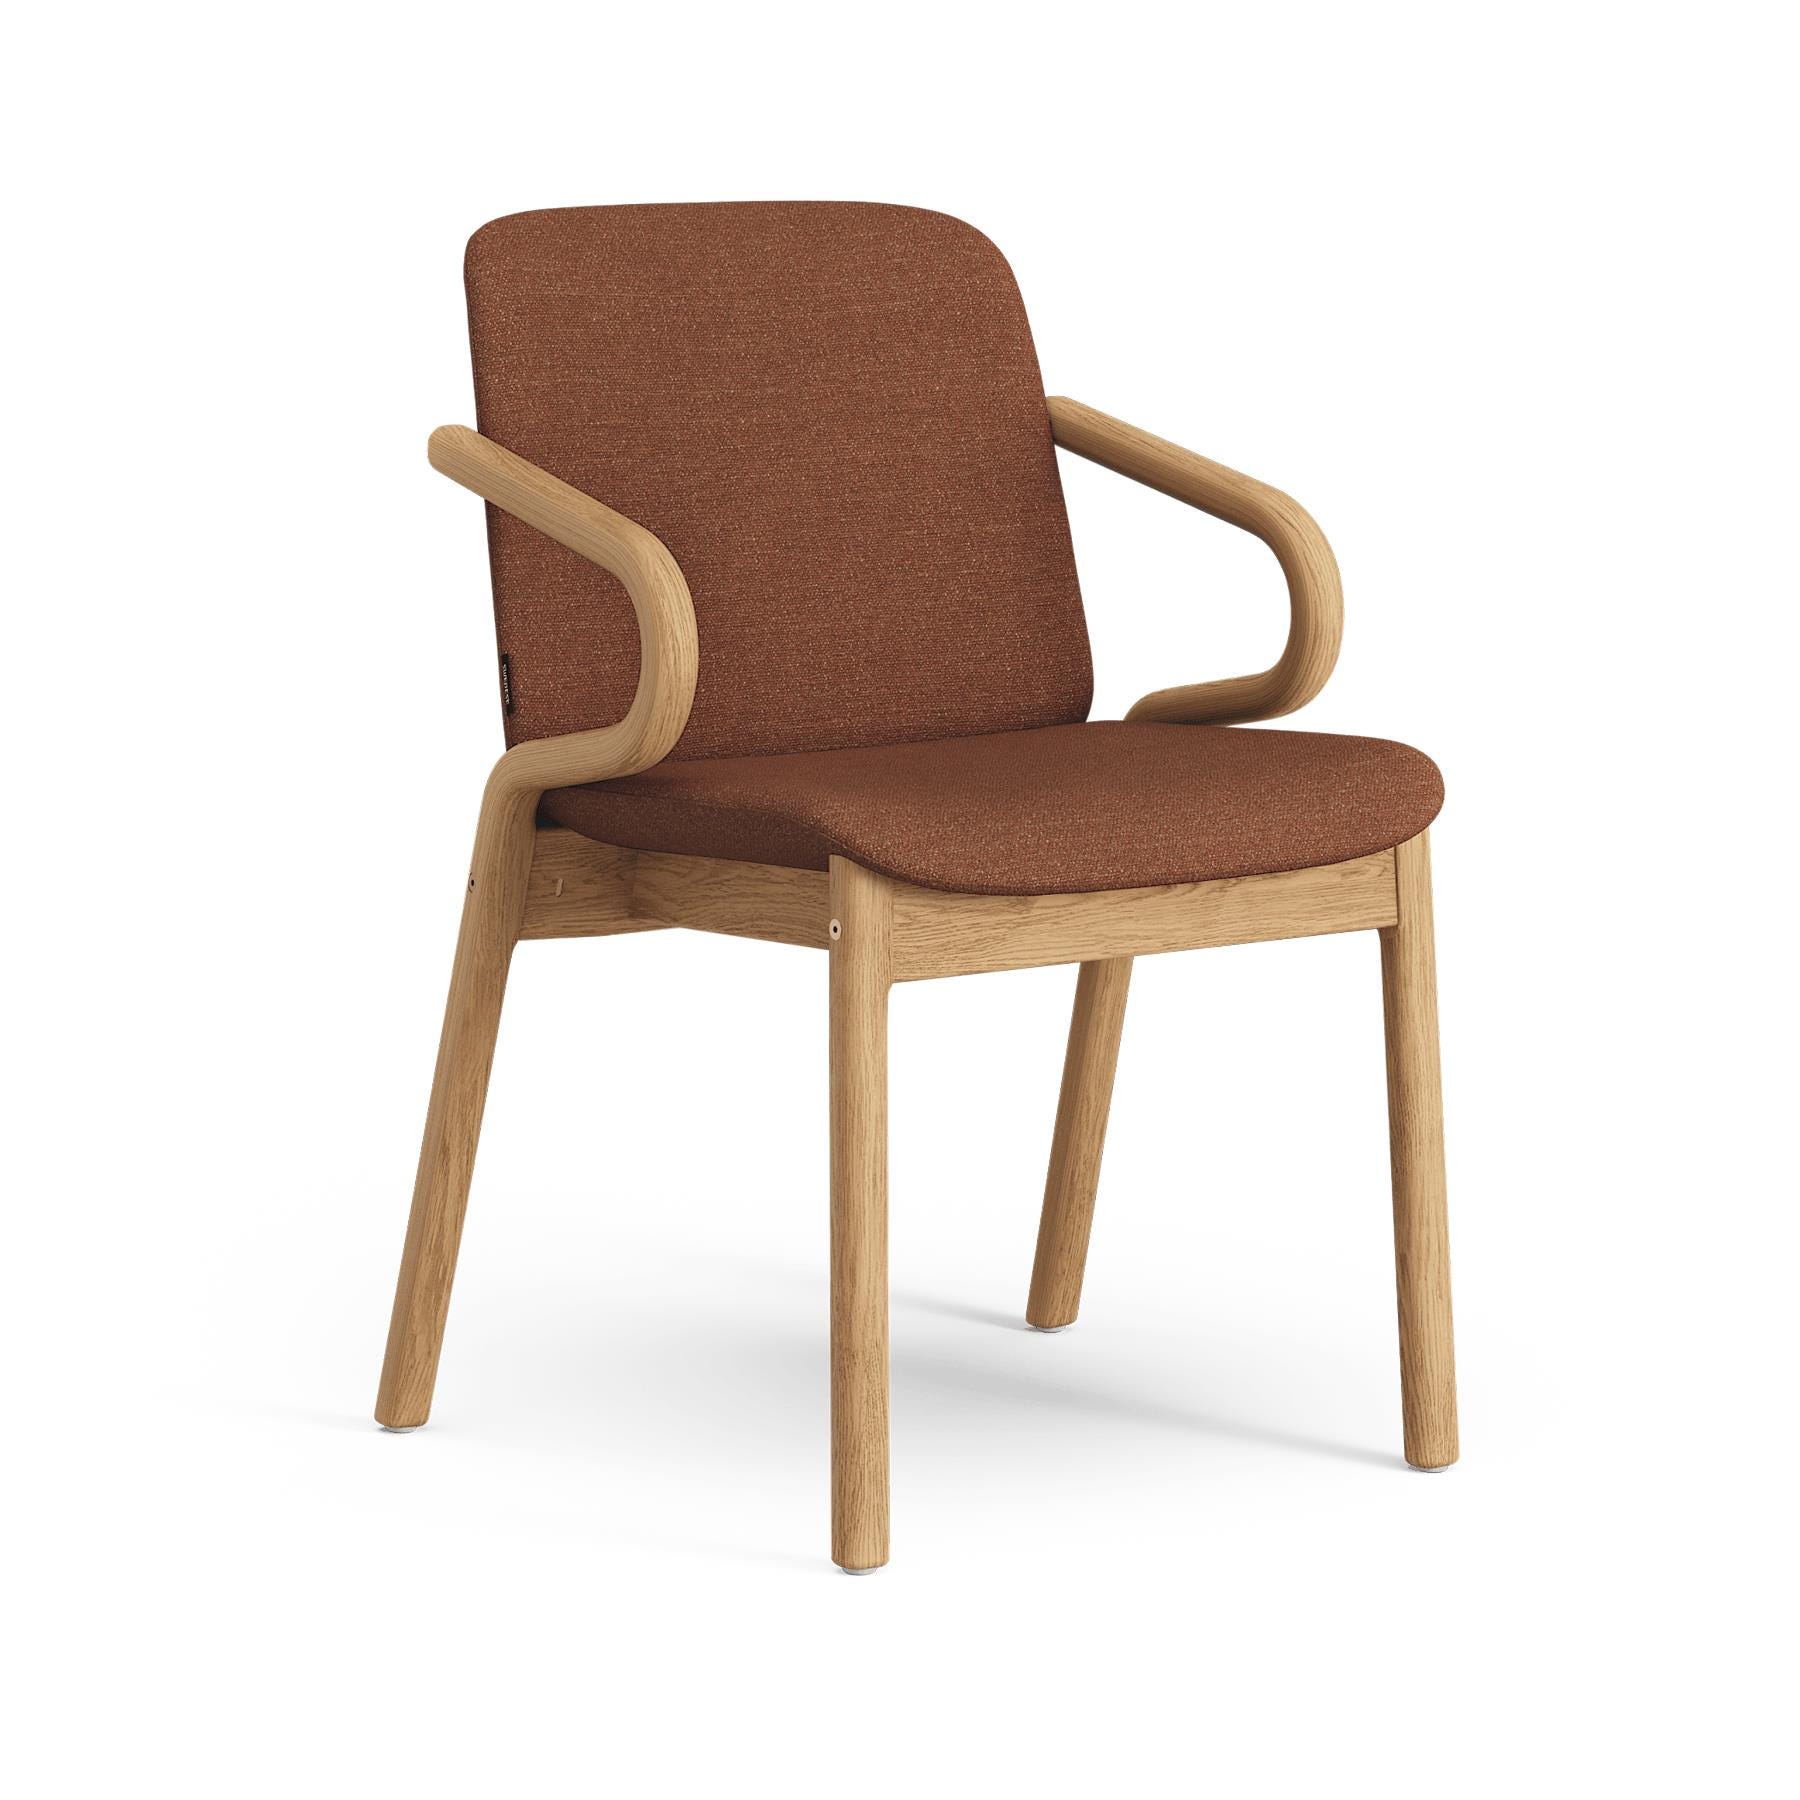 Swedese Amstelle Armchair Oiled Oak Ecriture 0570 Red Designer Furniture From Holloways Of Ludlow